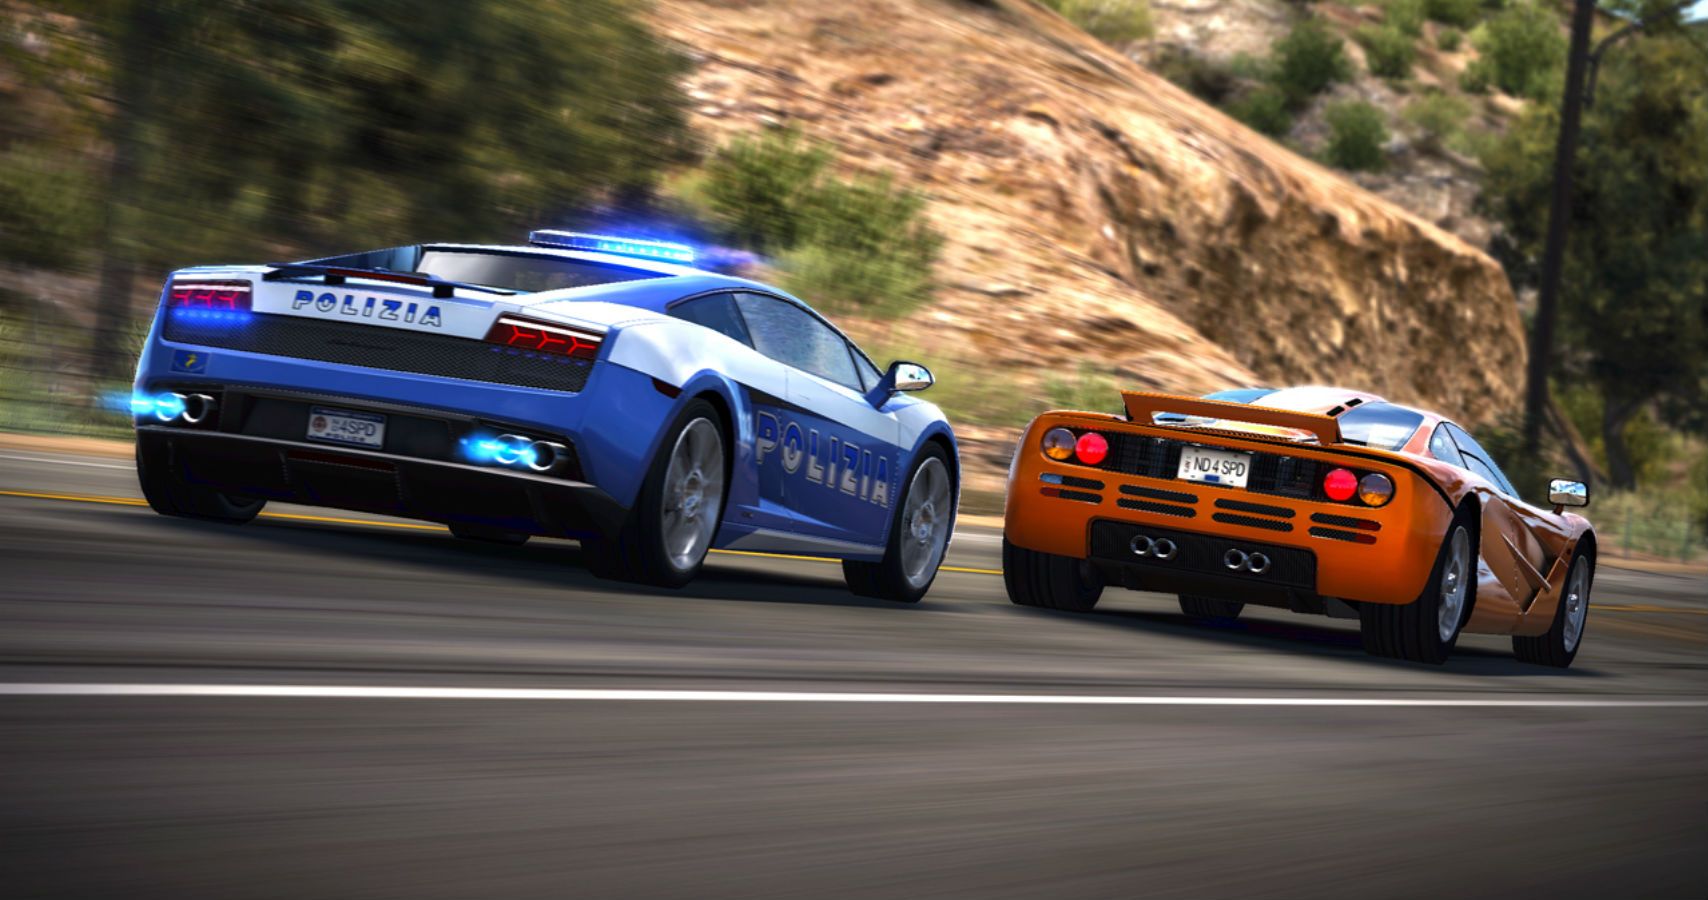 Need For Speed Hot Pursuit Gets Rating In Korea But Still No Announcement From EA